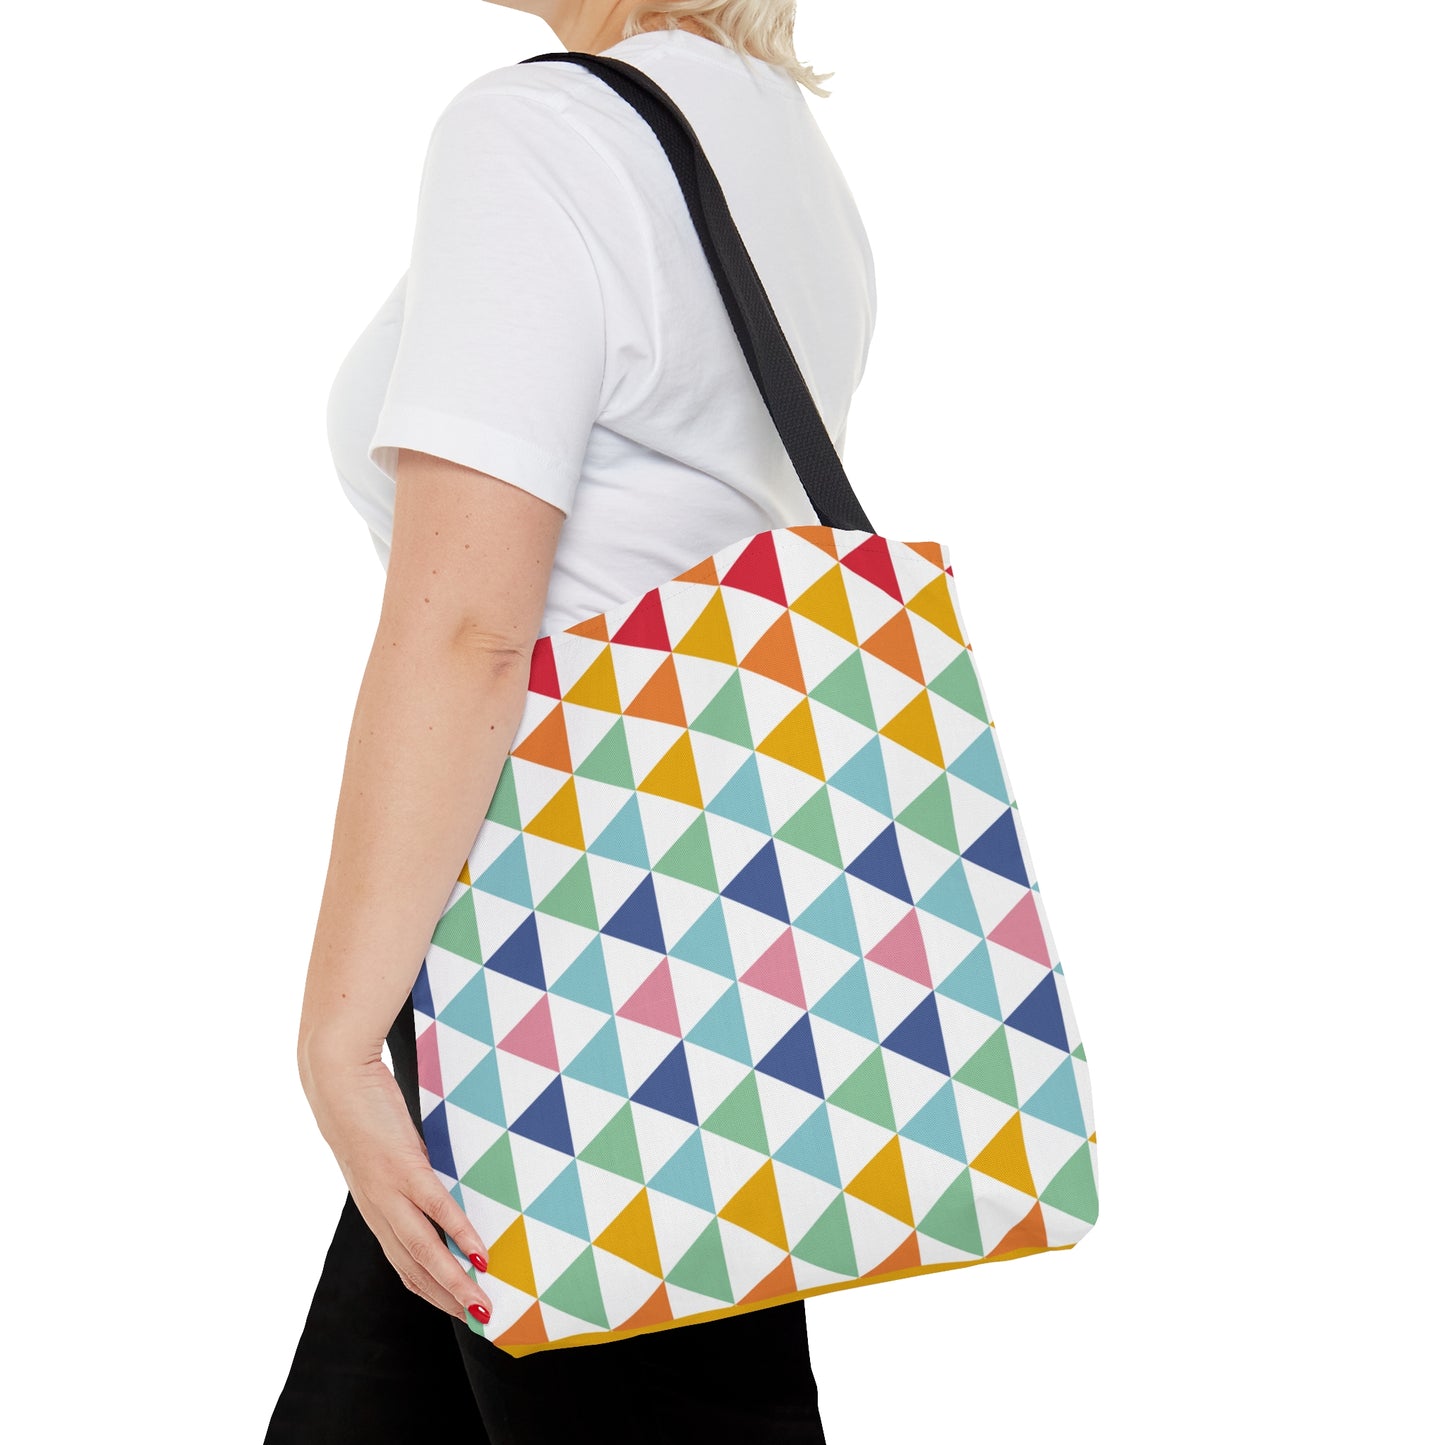 Colorful Triangles - Tote Bag